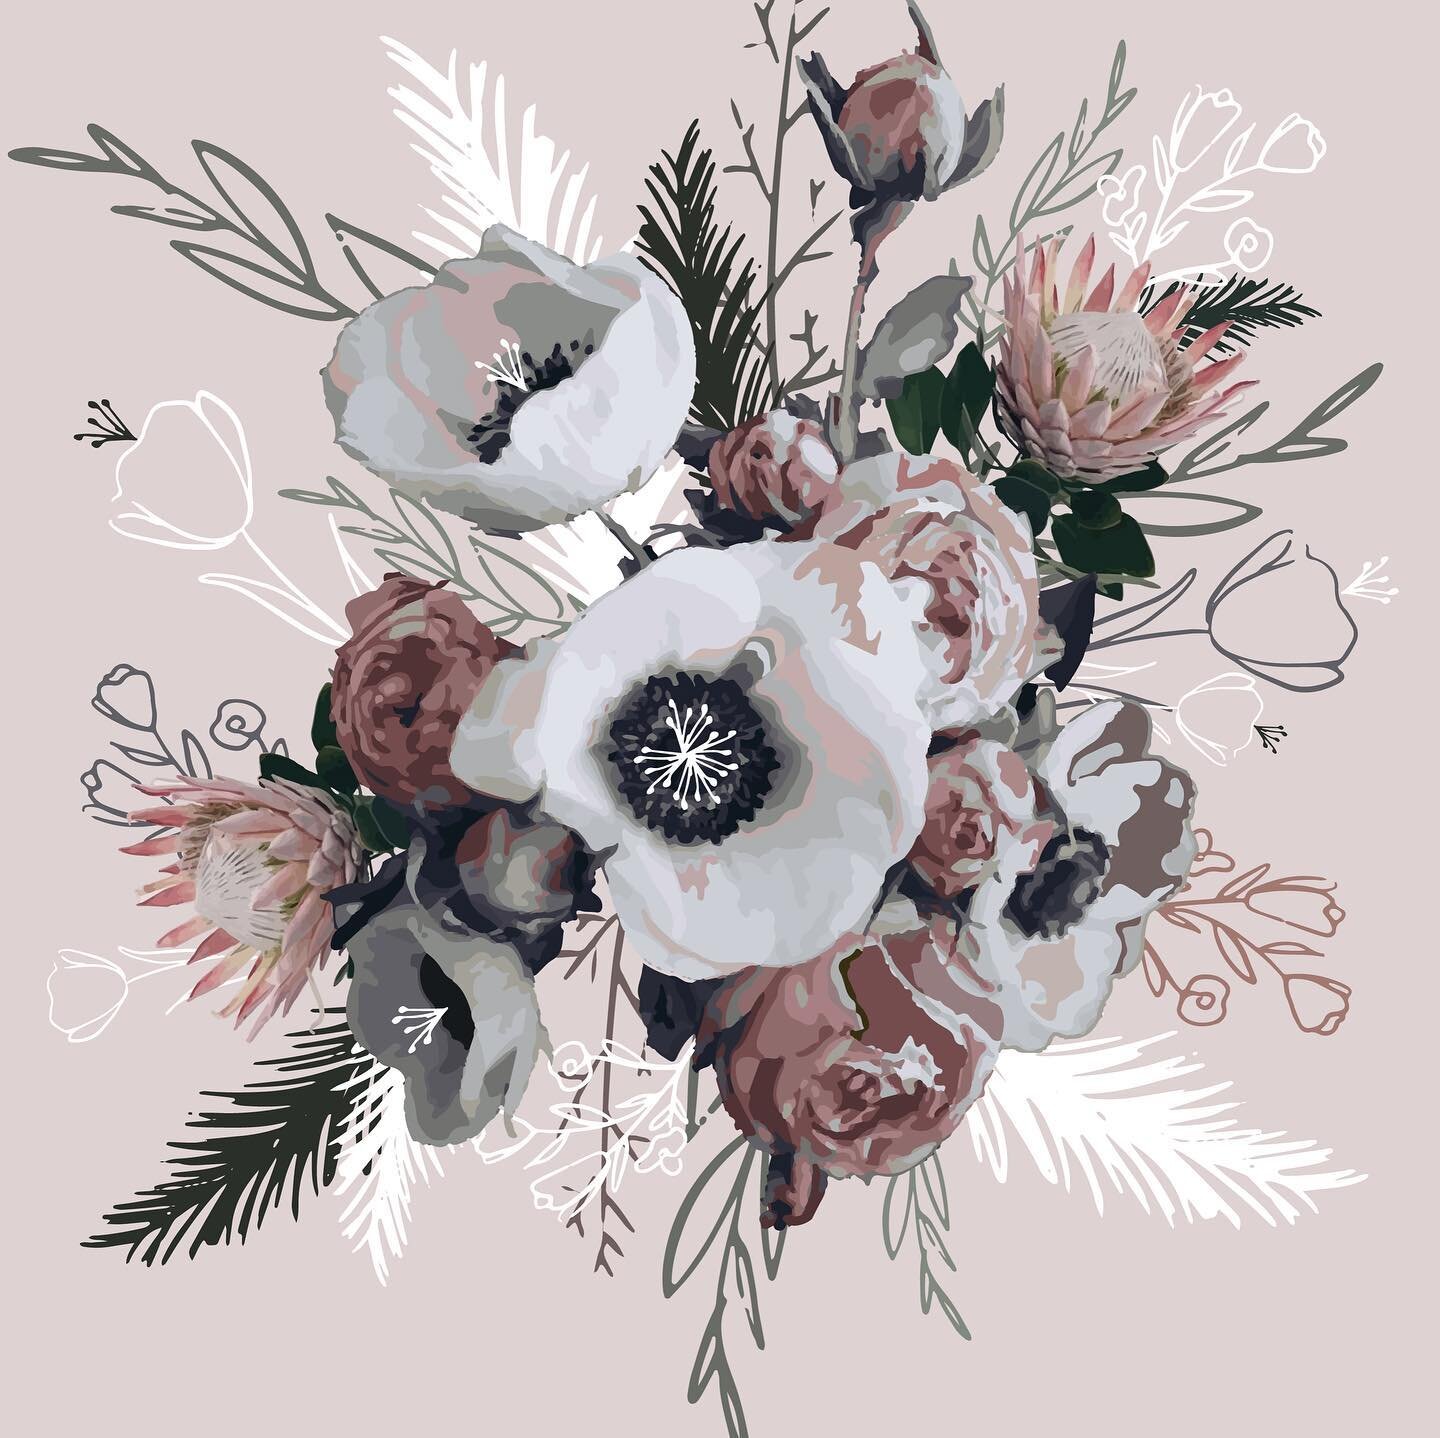 Came across this fun floral bouquet illustration I created on my iPad a while back and I&rsquo;m still so in love with it 😍 definitely want to get back into creating pieces like this!⁠⠀